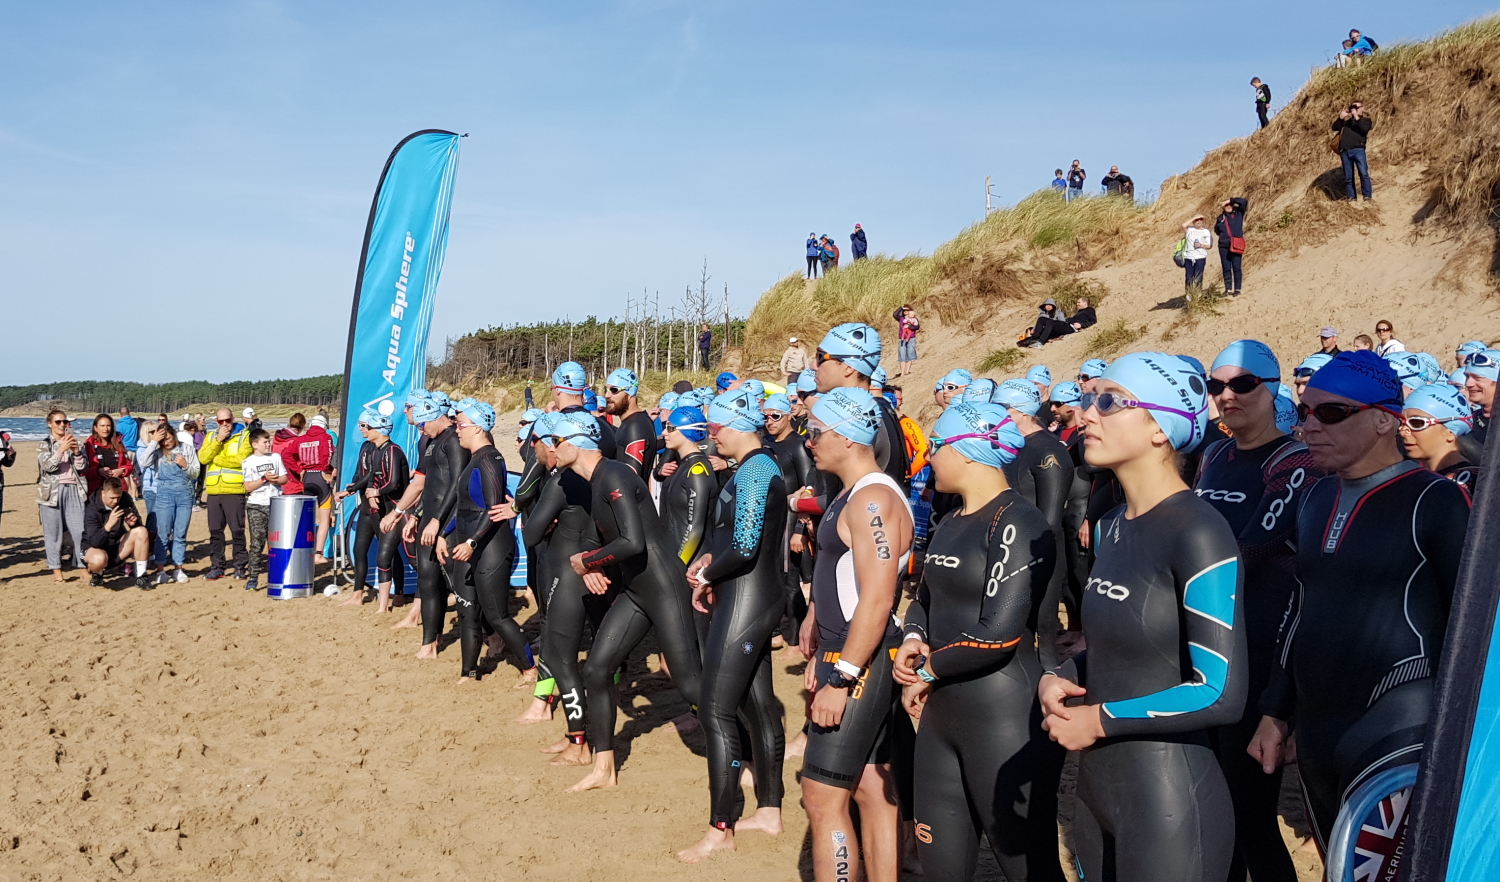 Planning your triathlon events when it’s just for fun